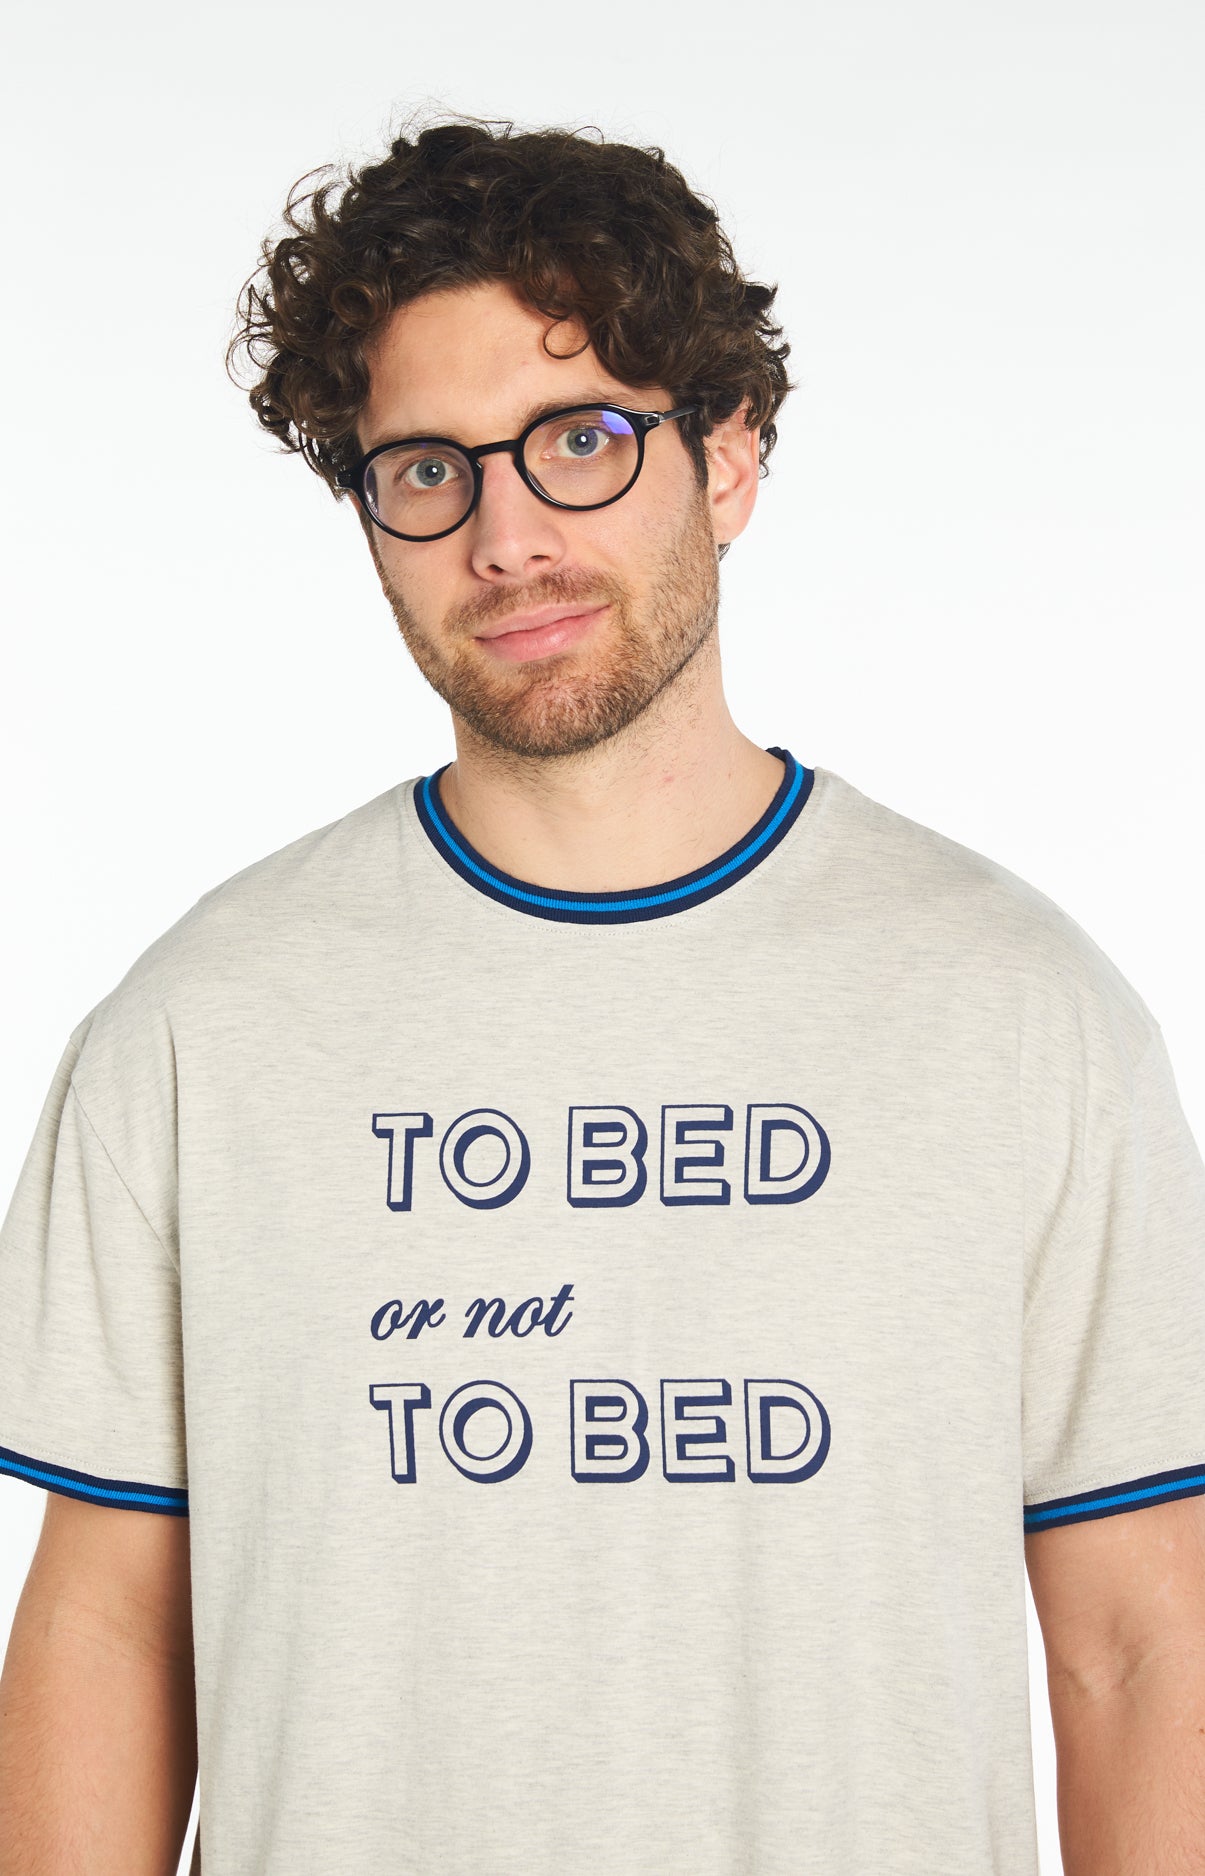 Maxi Tee Shirt Bed or not to Bed 4